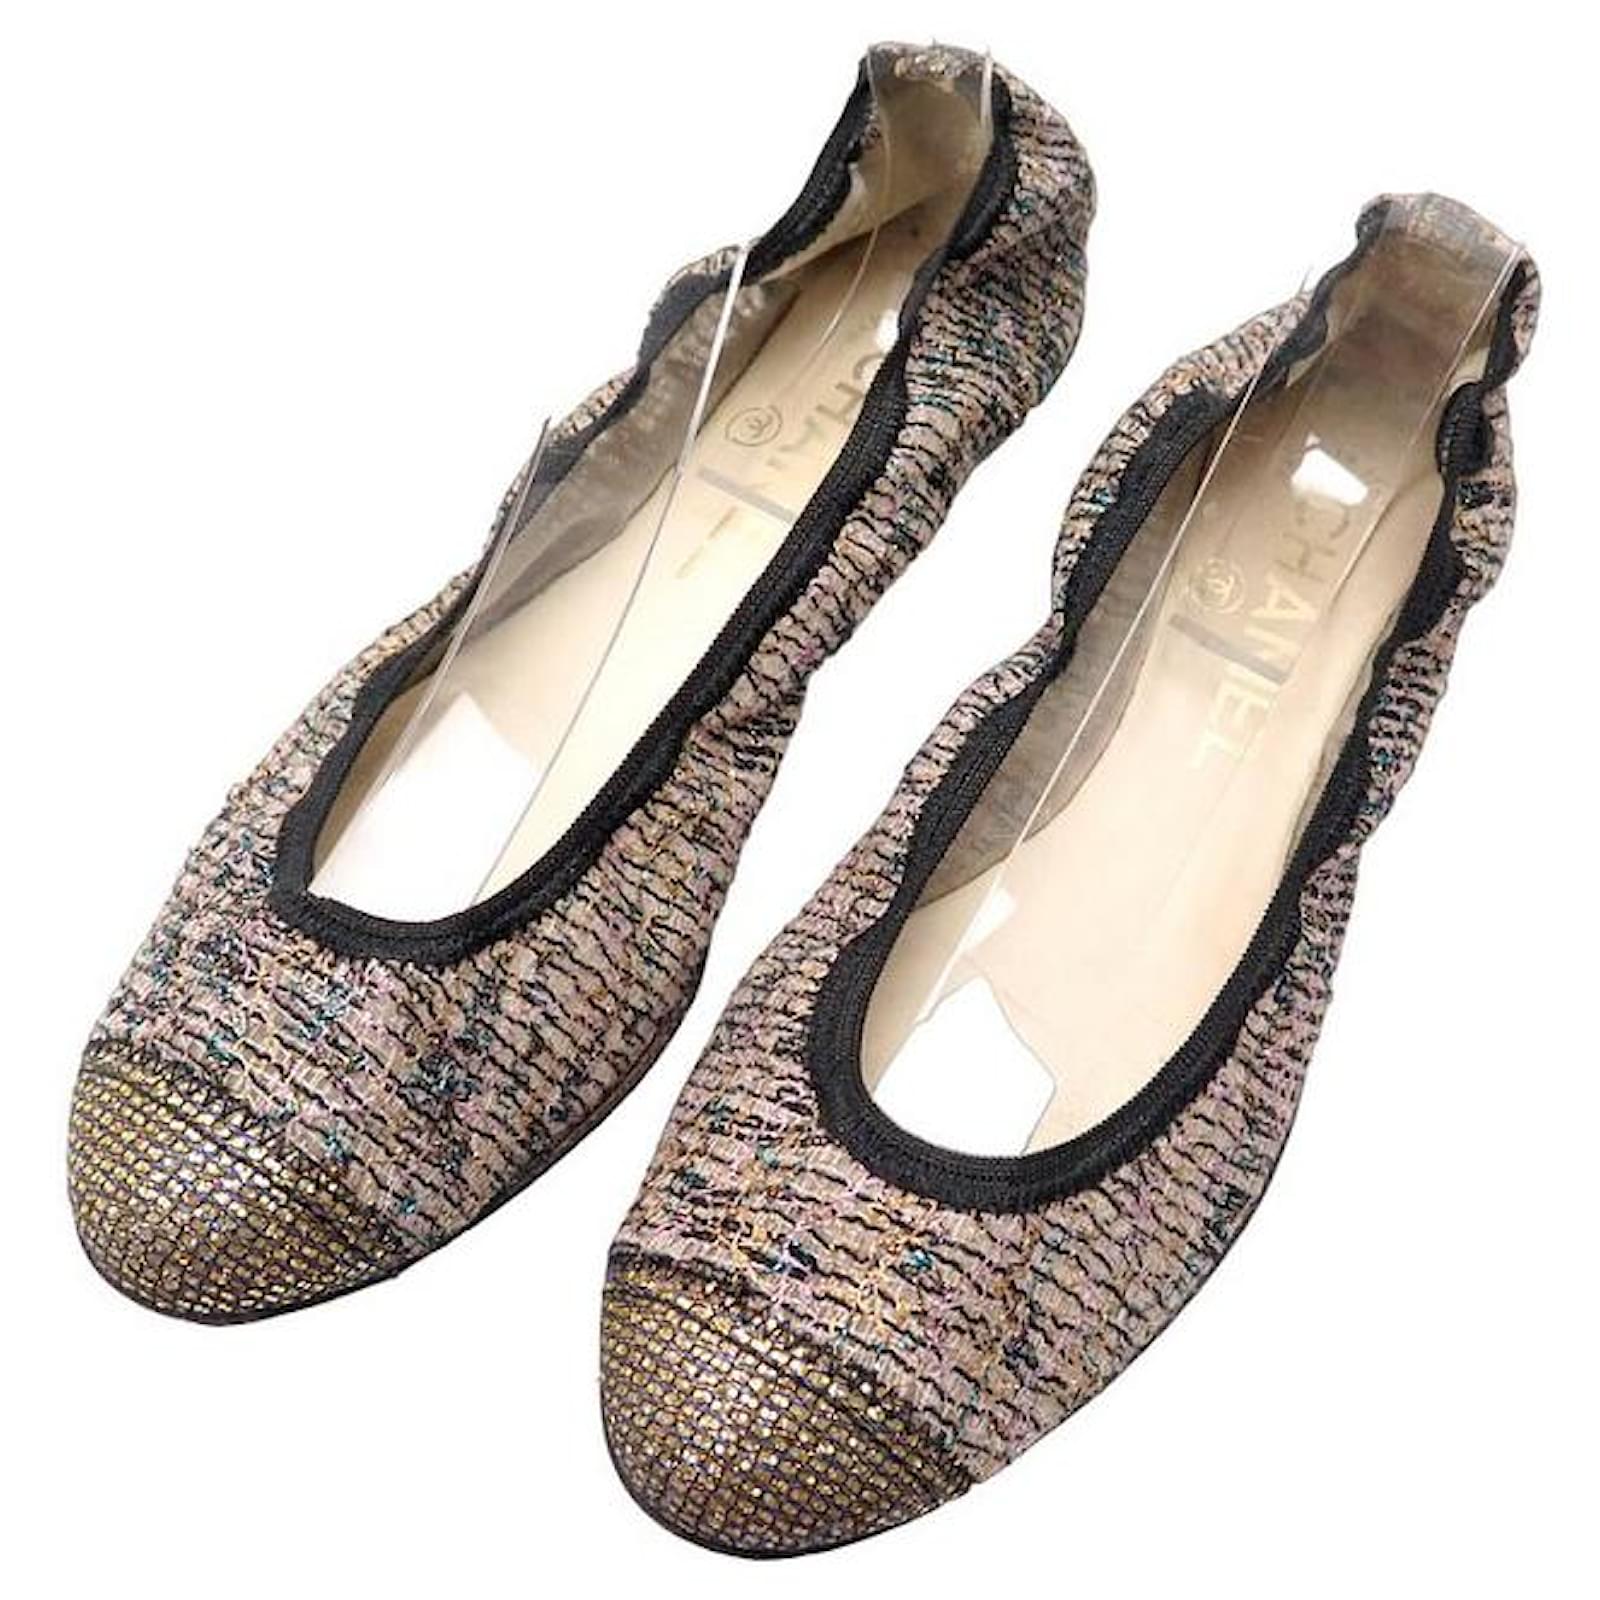 CHANEL BALLERINA SHOES IN MULTICOLOR TWEED 37 CANVAS FLAT SHOES